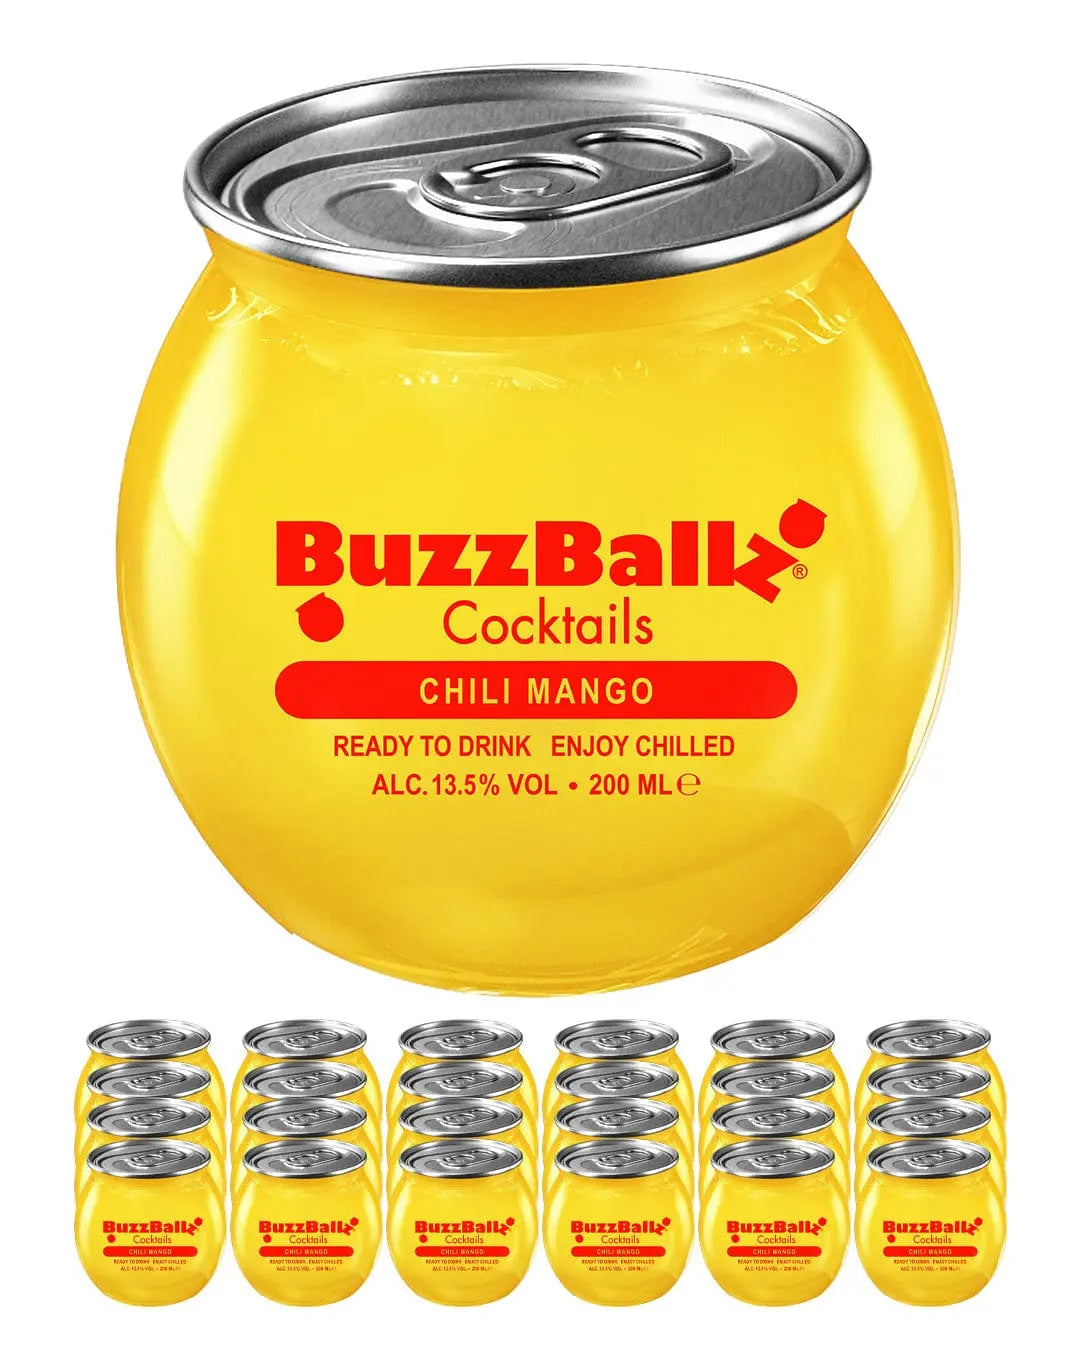 BuzzBallz Chili Mango Cocktail Multipack, 24 x 200 ml Ready Made Cocktails